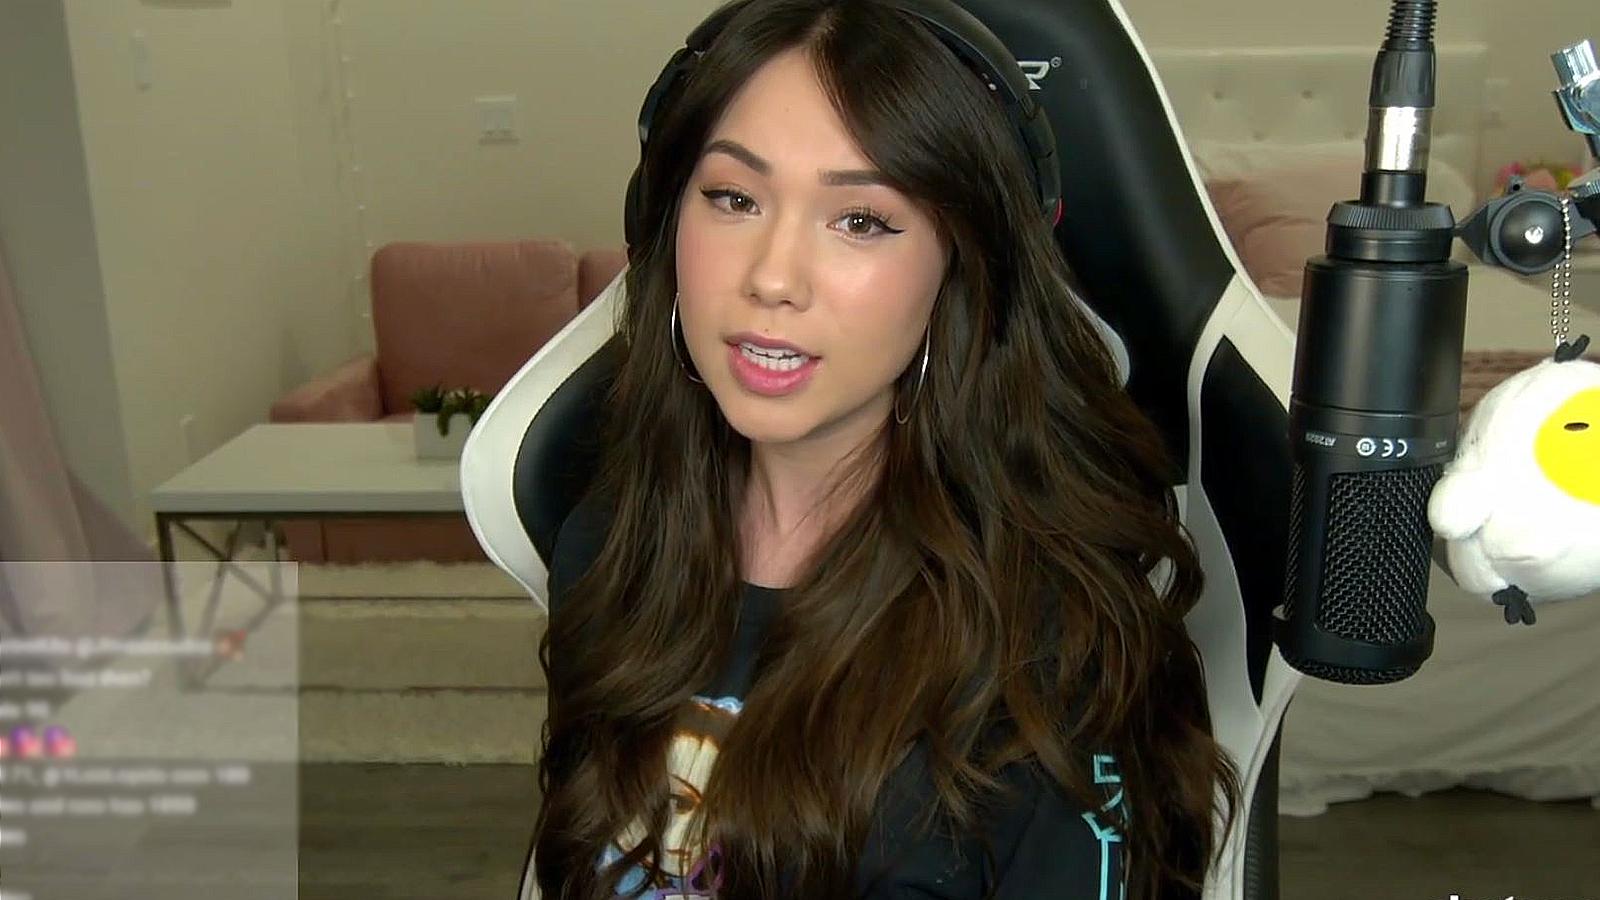 Streamer asks fans to stop DMing her after Valentine's Day comments -  Dexerto